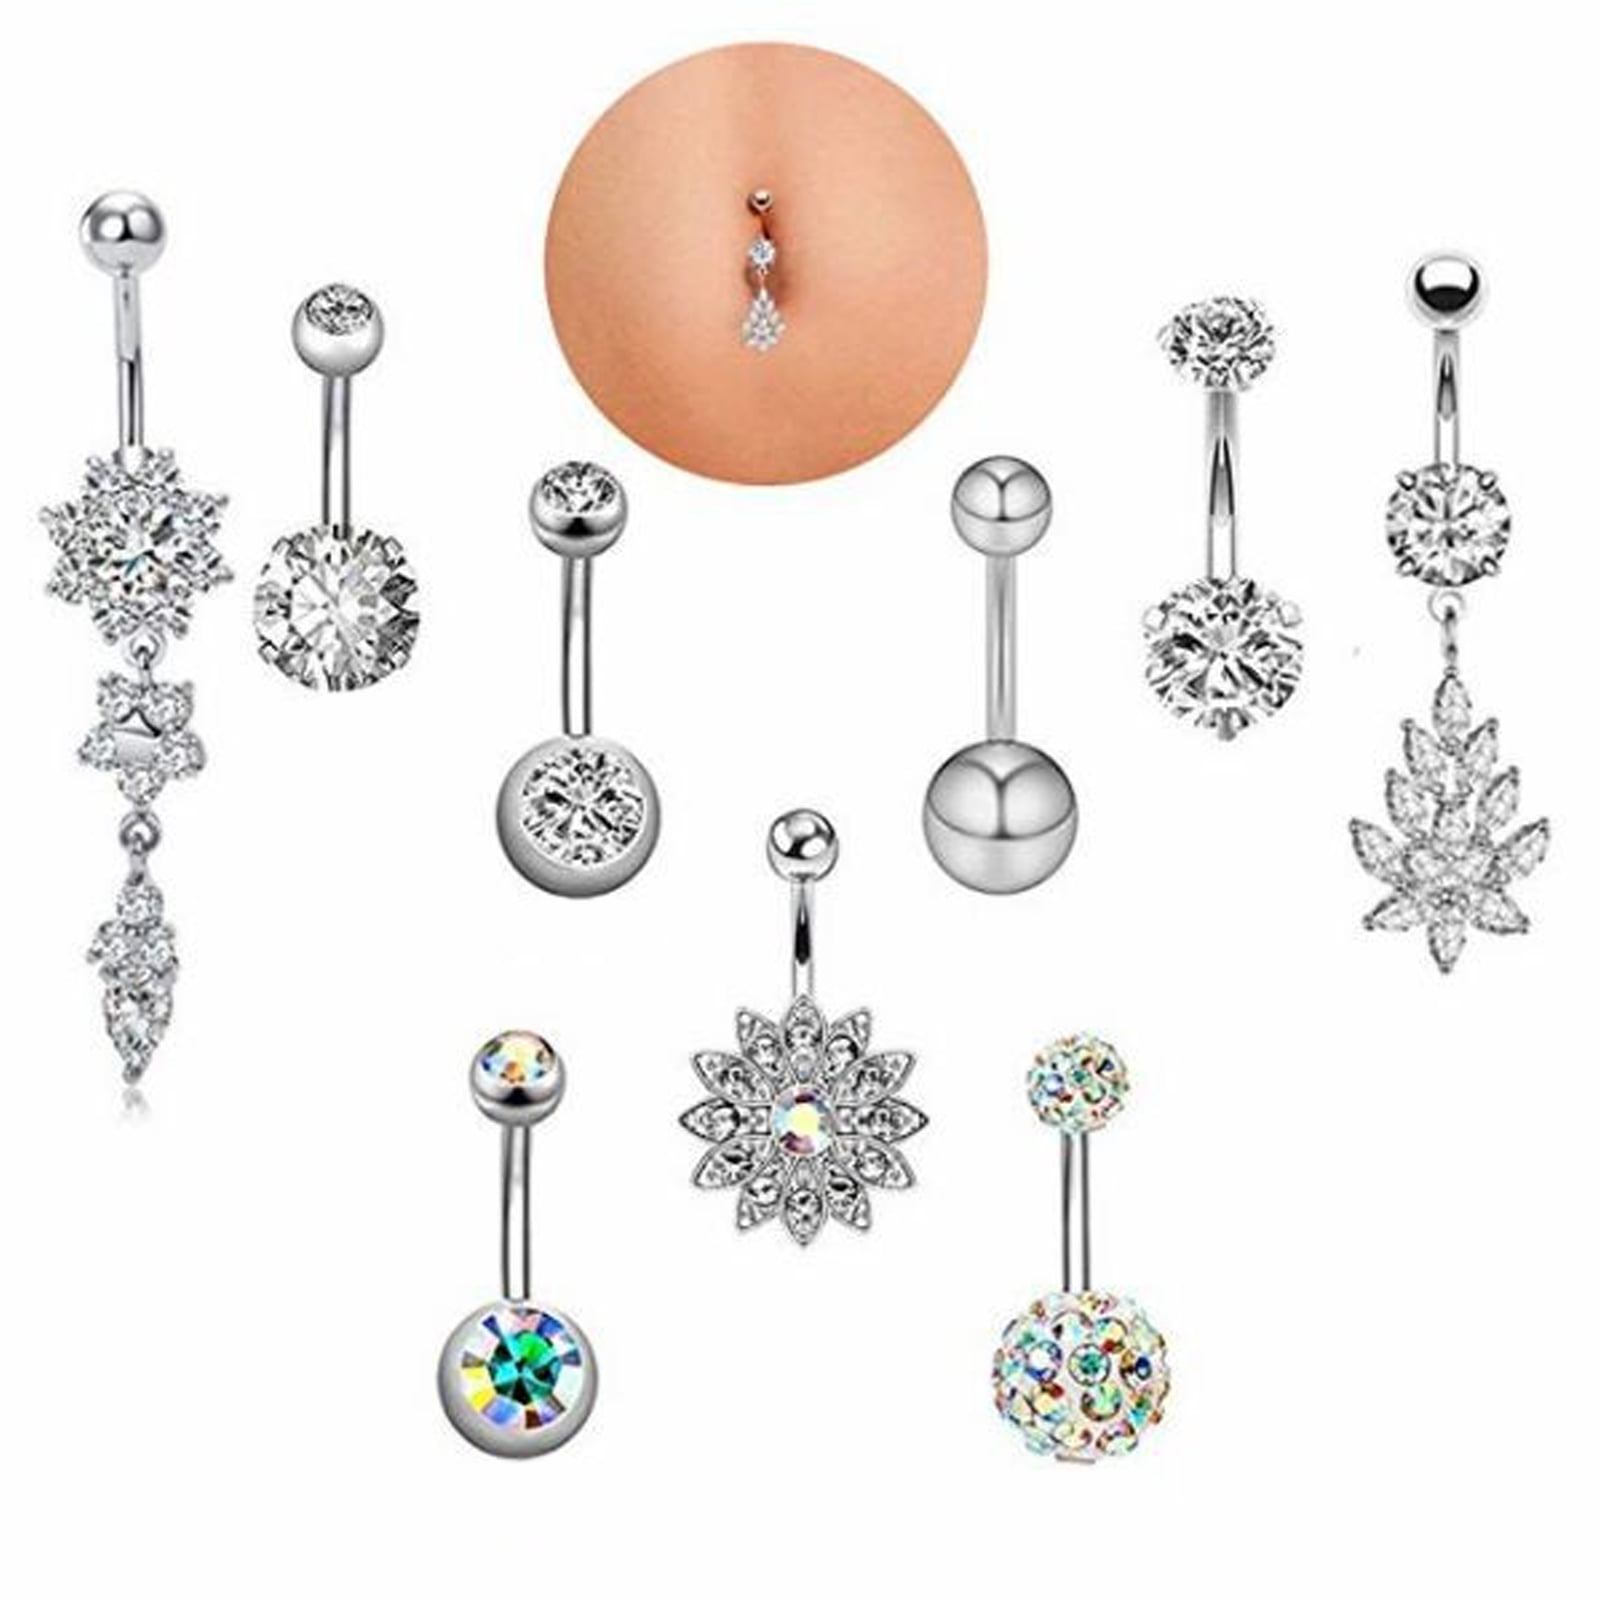 9Pcs/Lot Women Belly Rings Set Stainless Steel Navel Rings 9 Colors Cubic Zircon